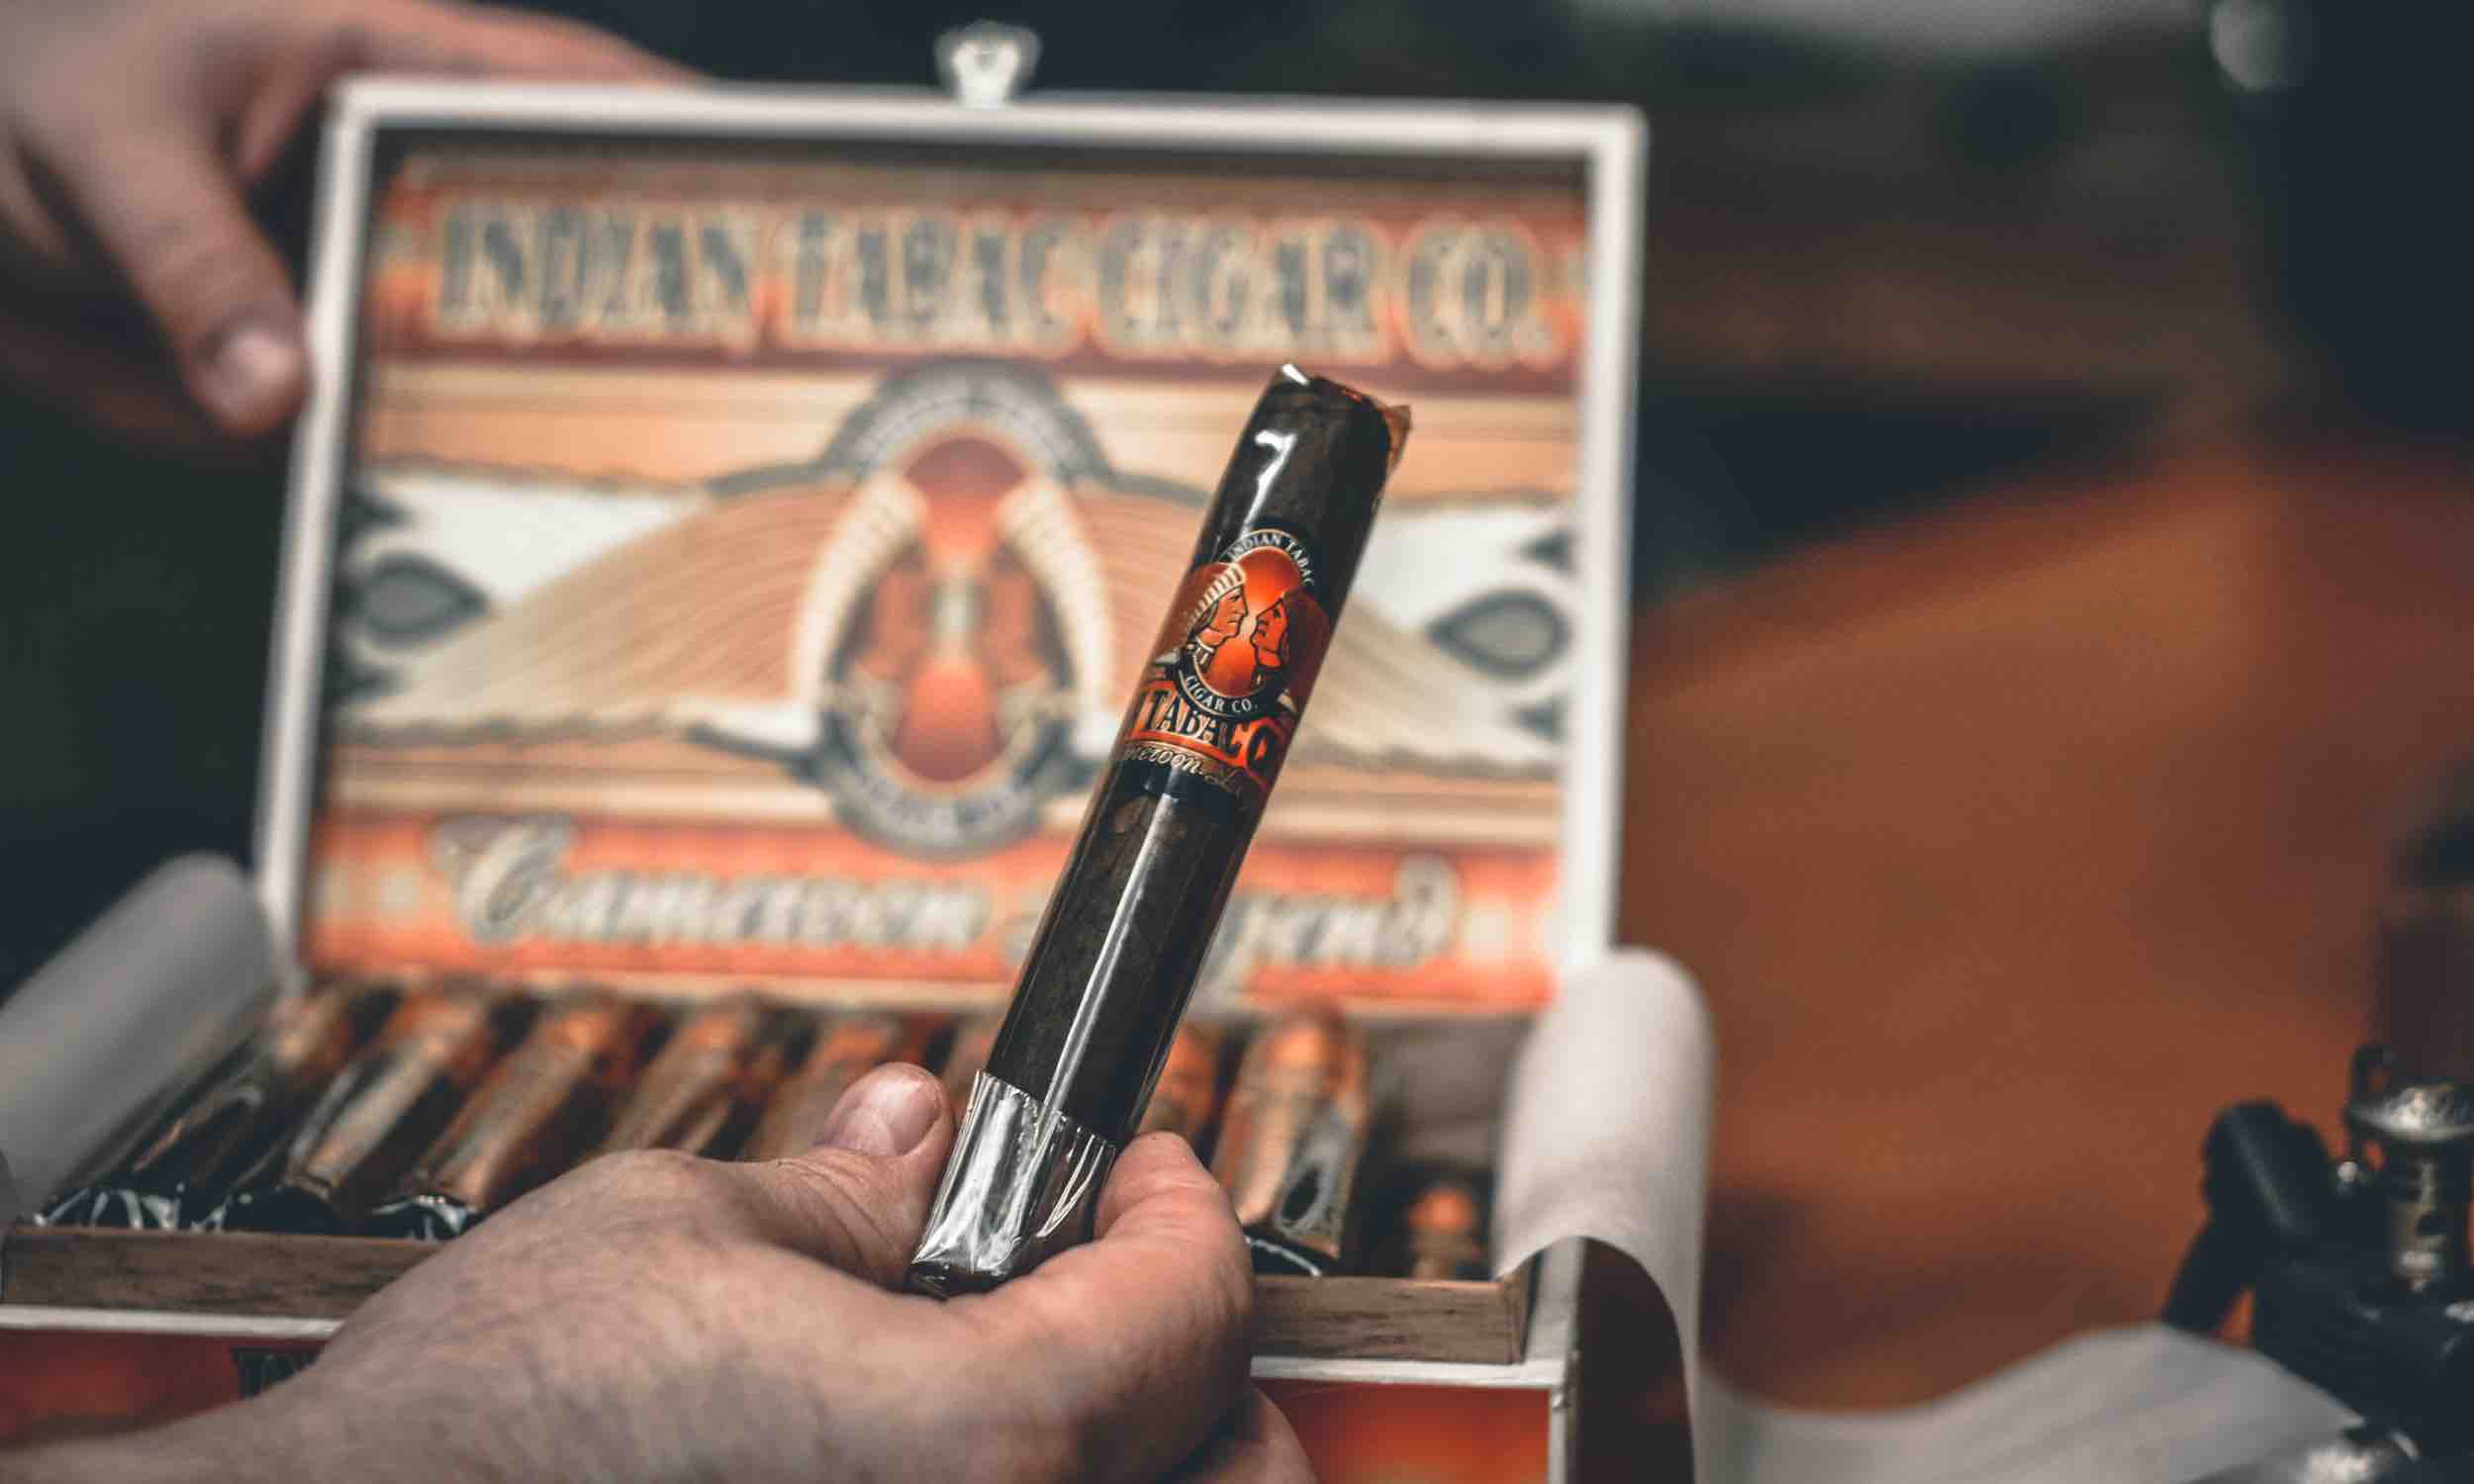 Image of a cigar being held near a box of cigars